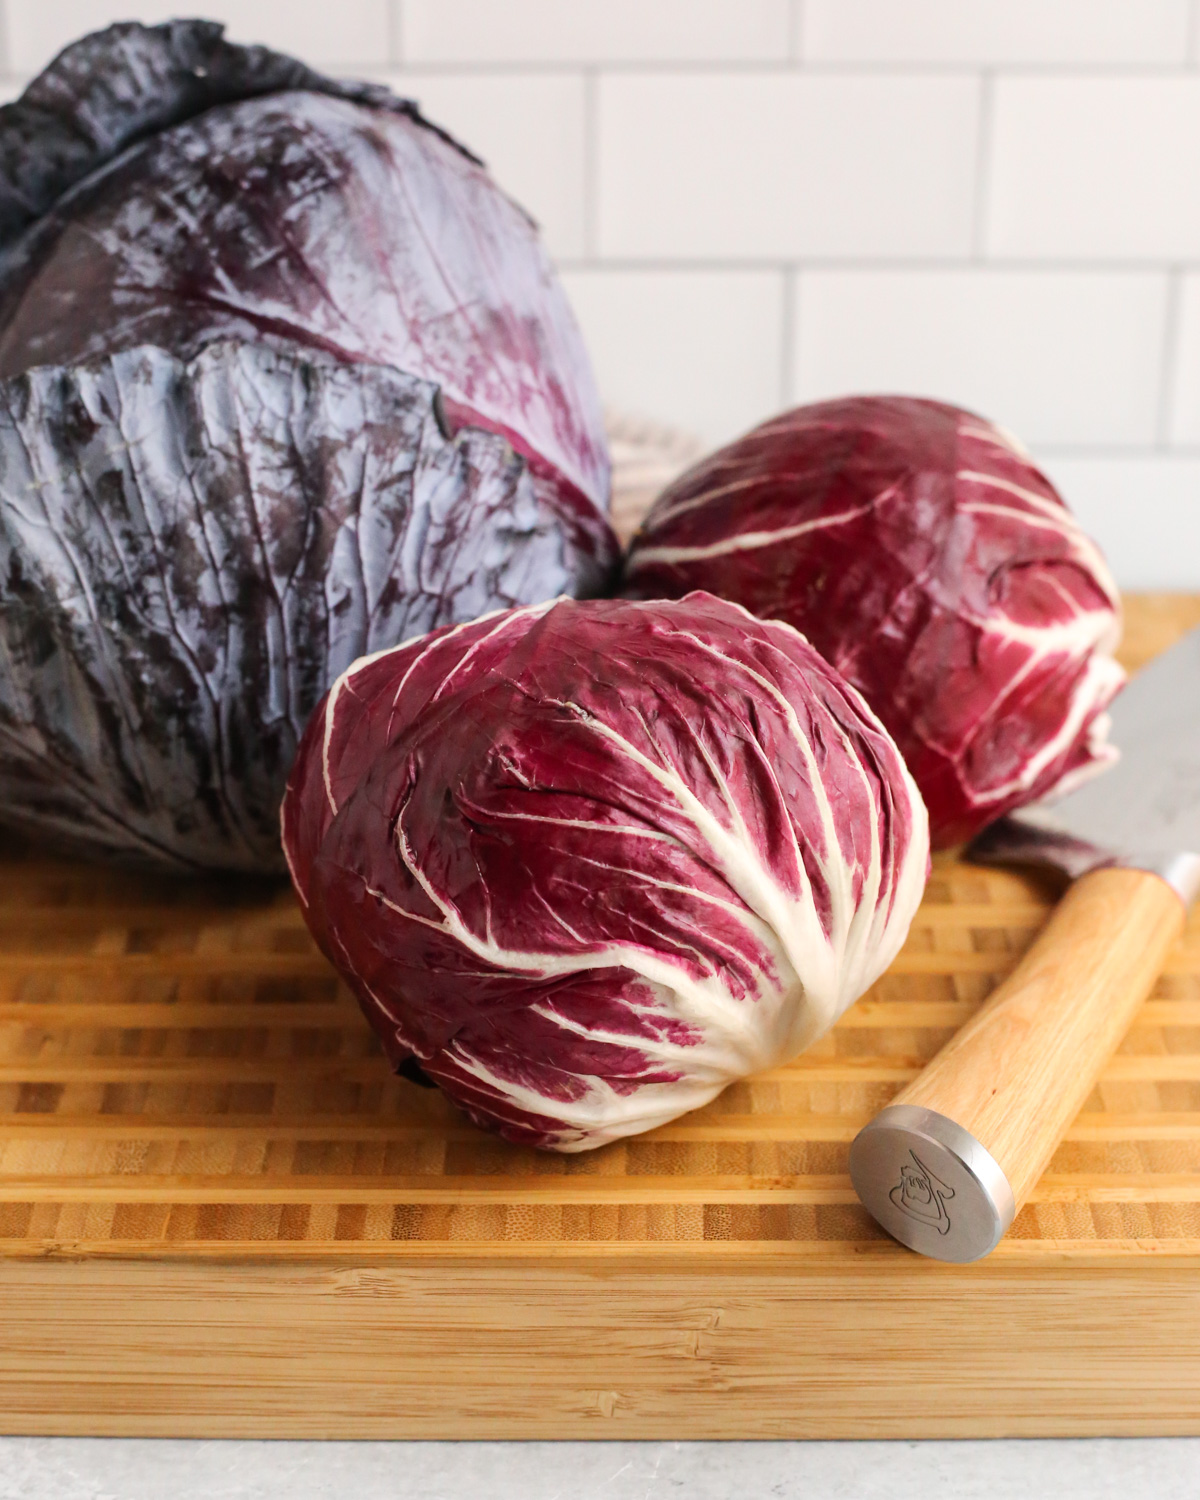 Brightly lit image of two heads of radicchio on a wooden butcher block cutting board, positioned in front of a large head of red cabbage